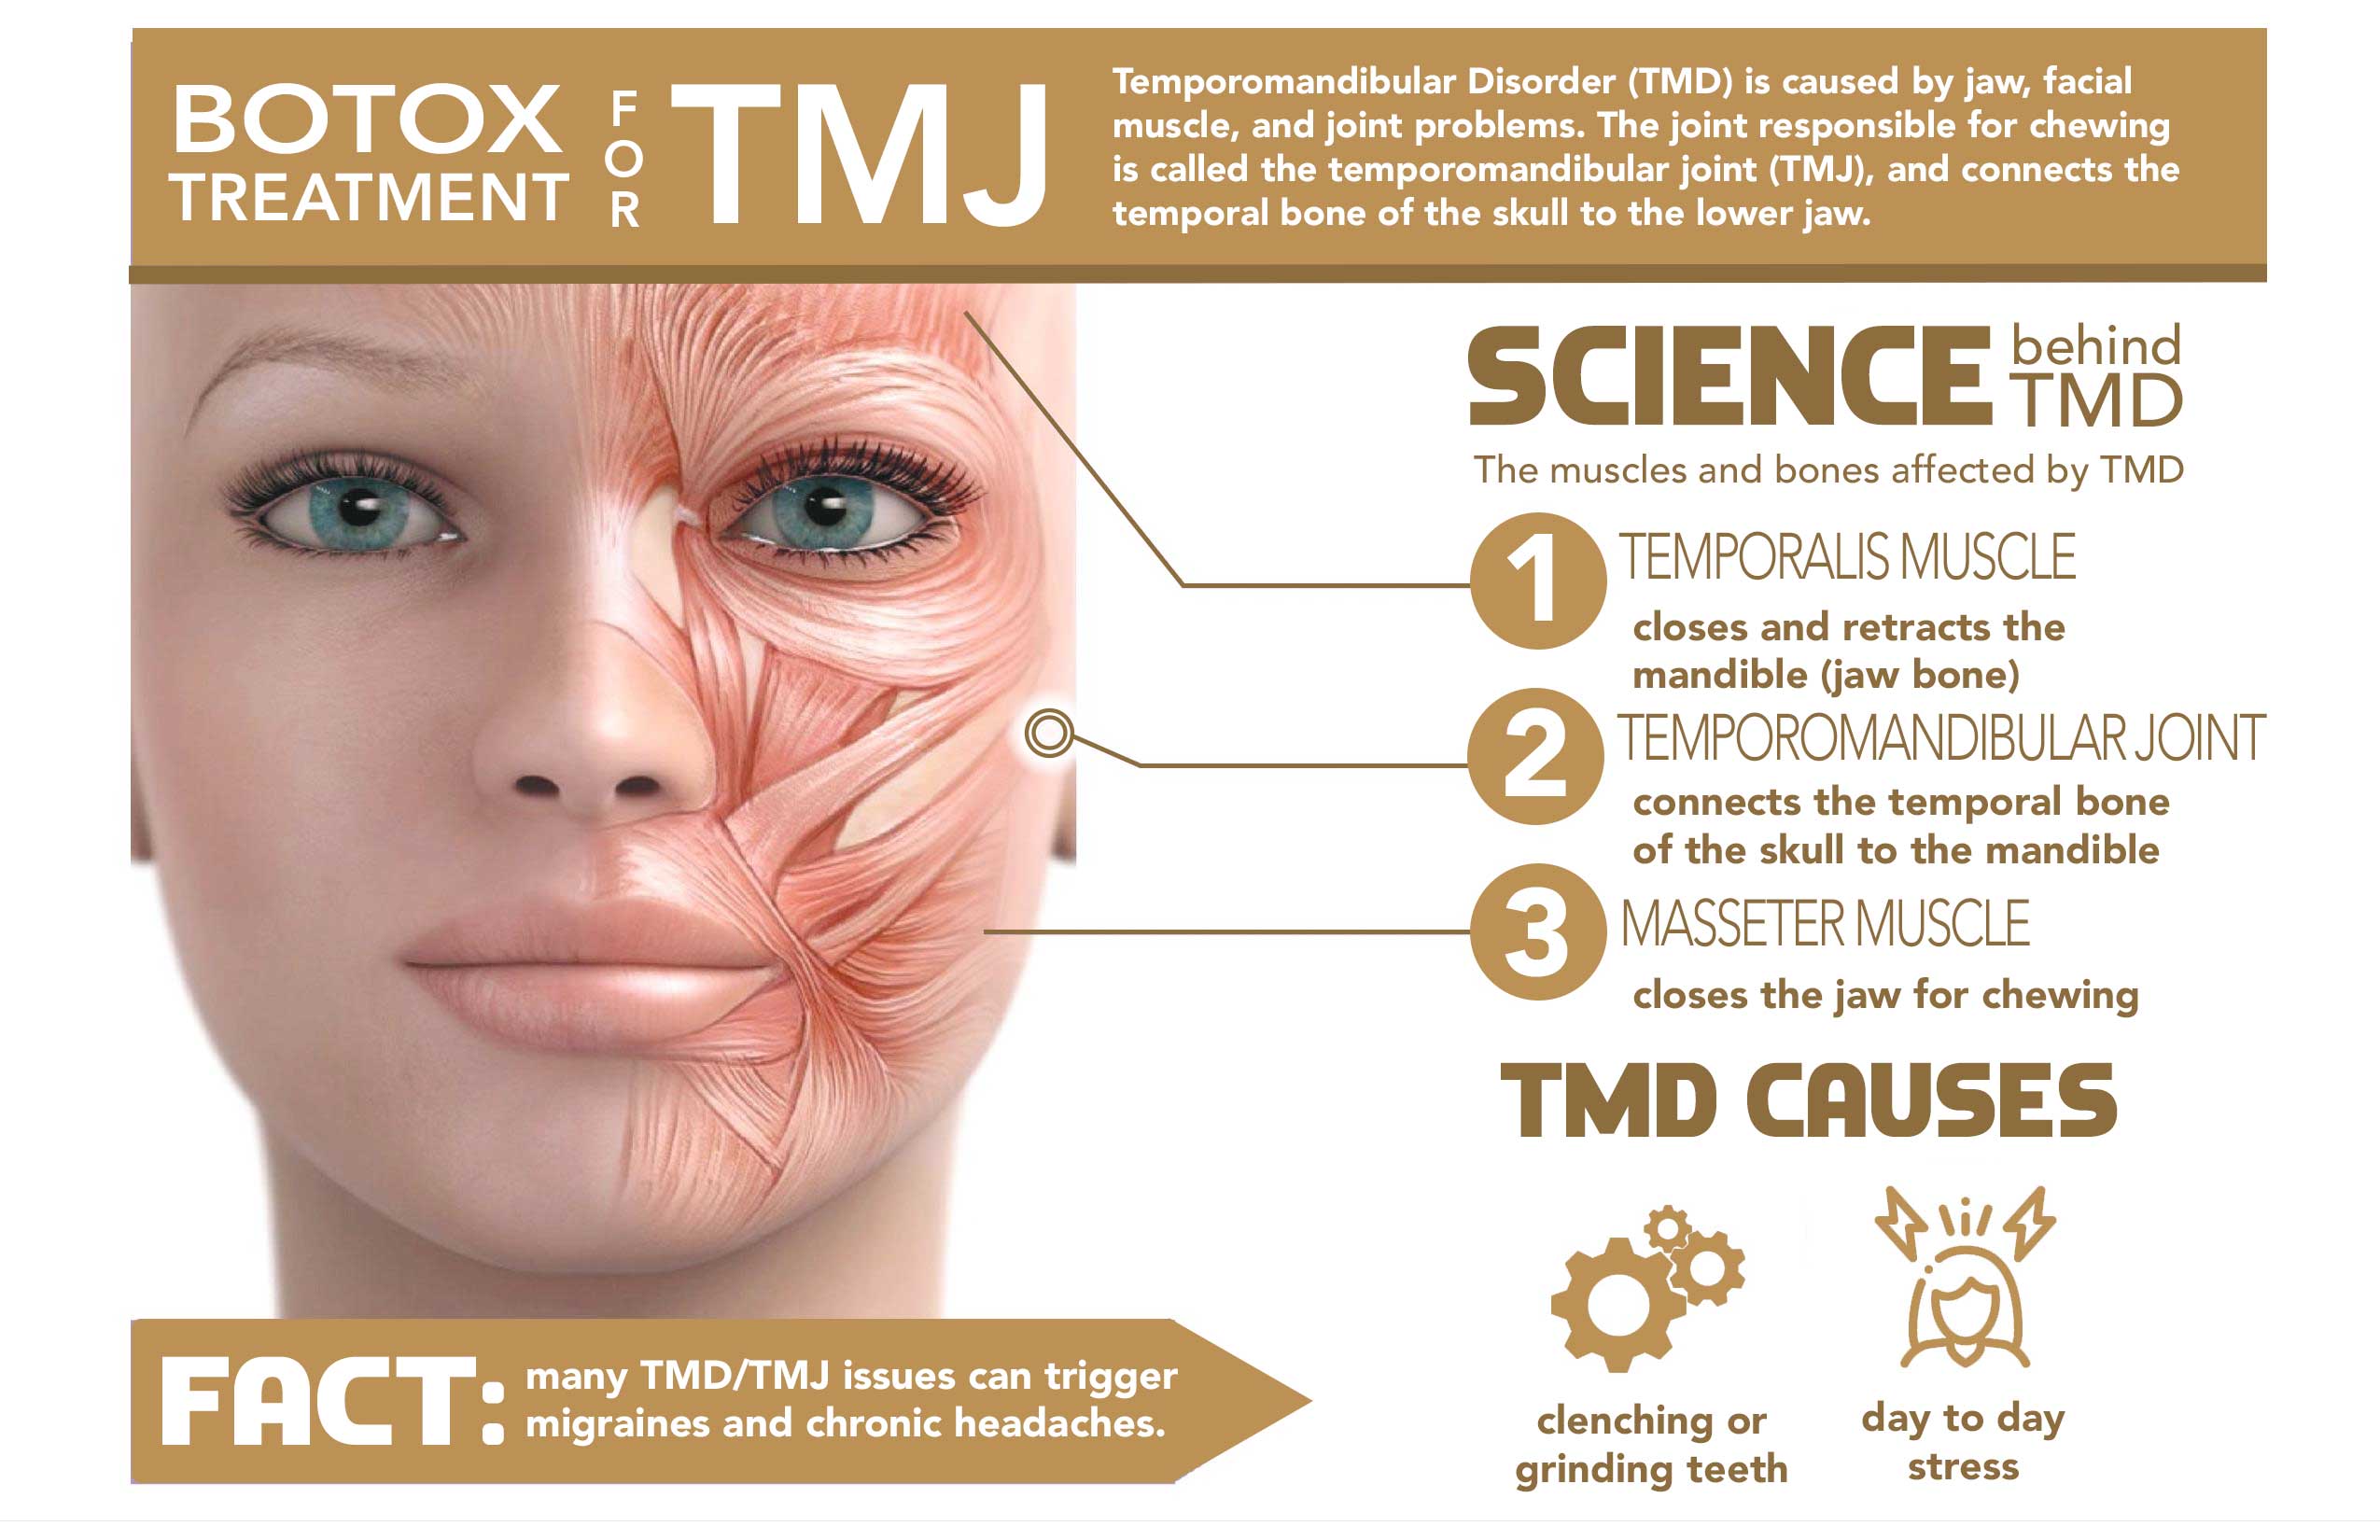 BOTOX for TMJ and MIGRAINES